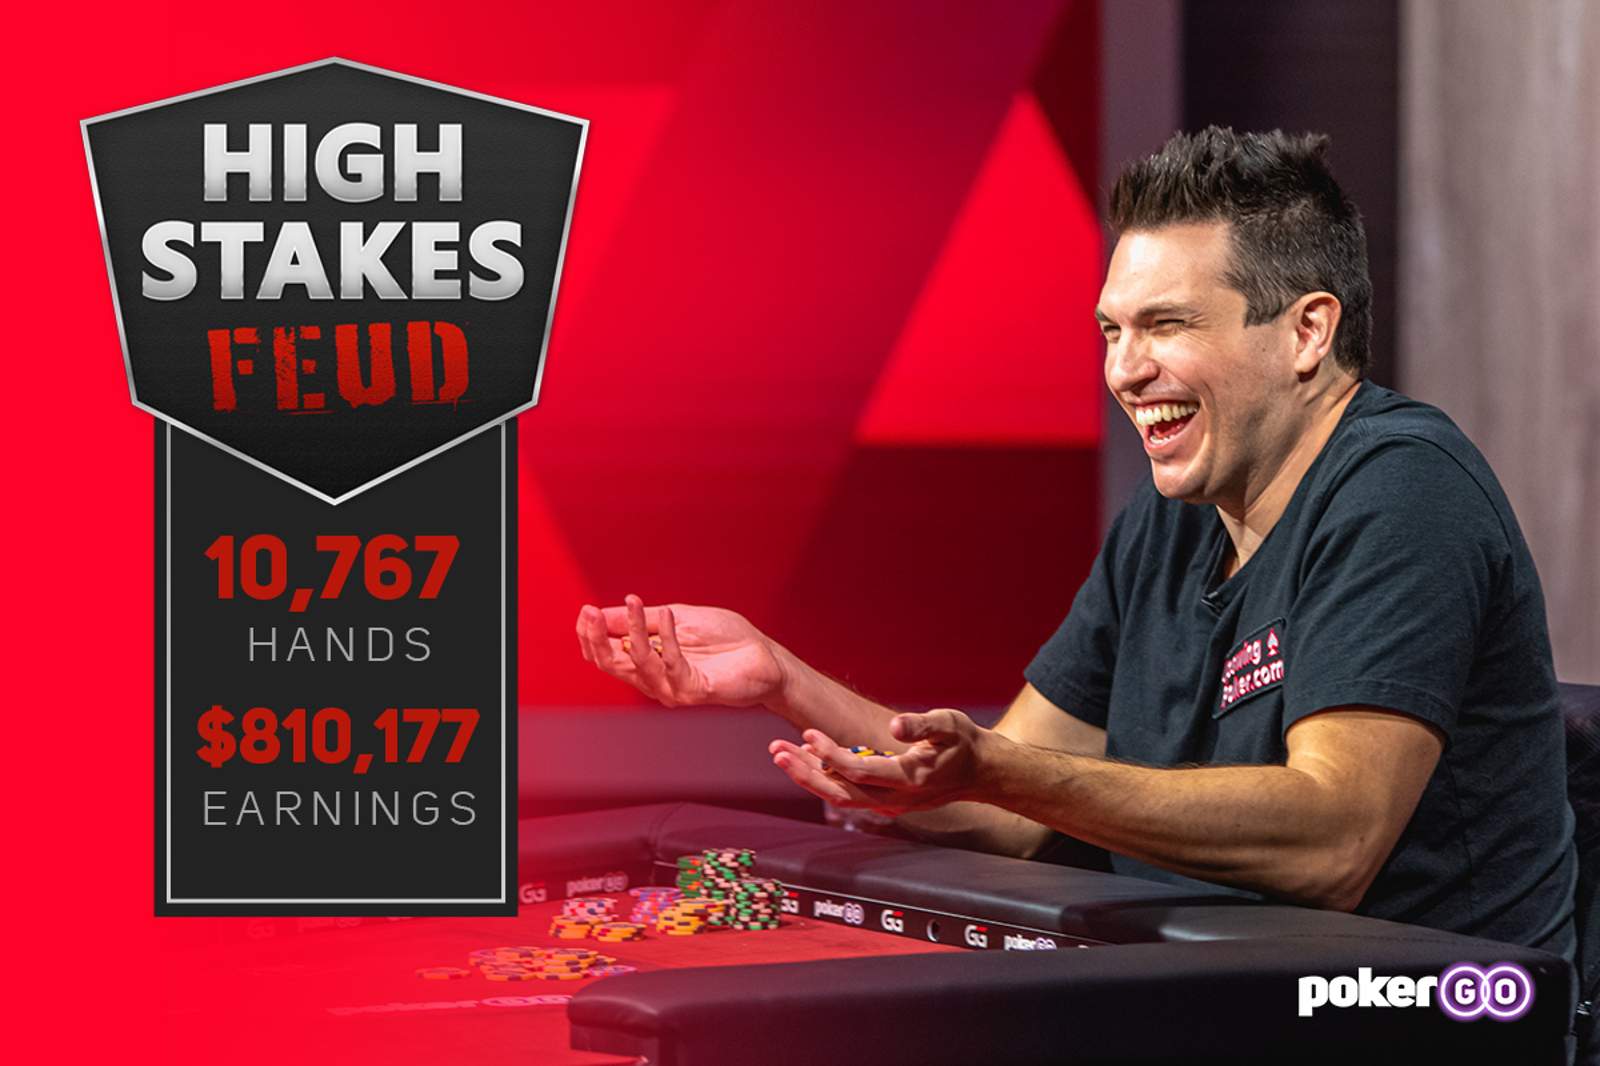 Doug Polk Leads Daniel Negreanu by $810,177 After 10,767 Hands in High Stakes Feud